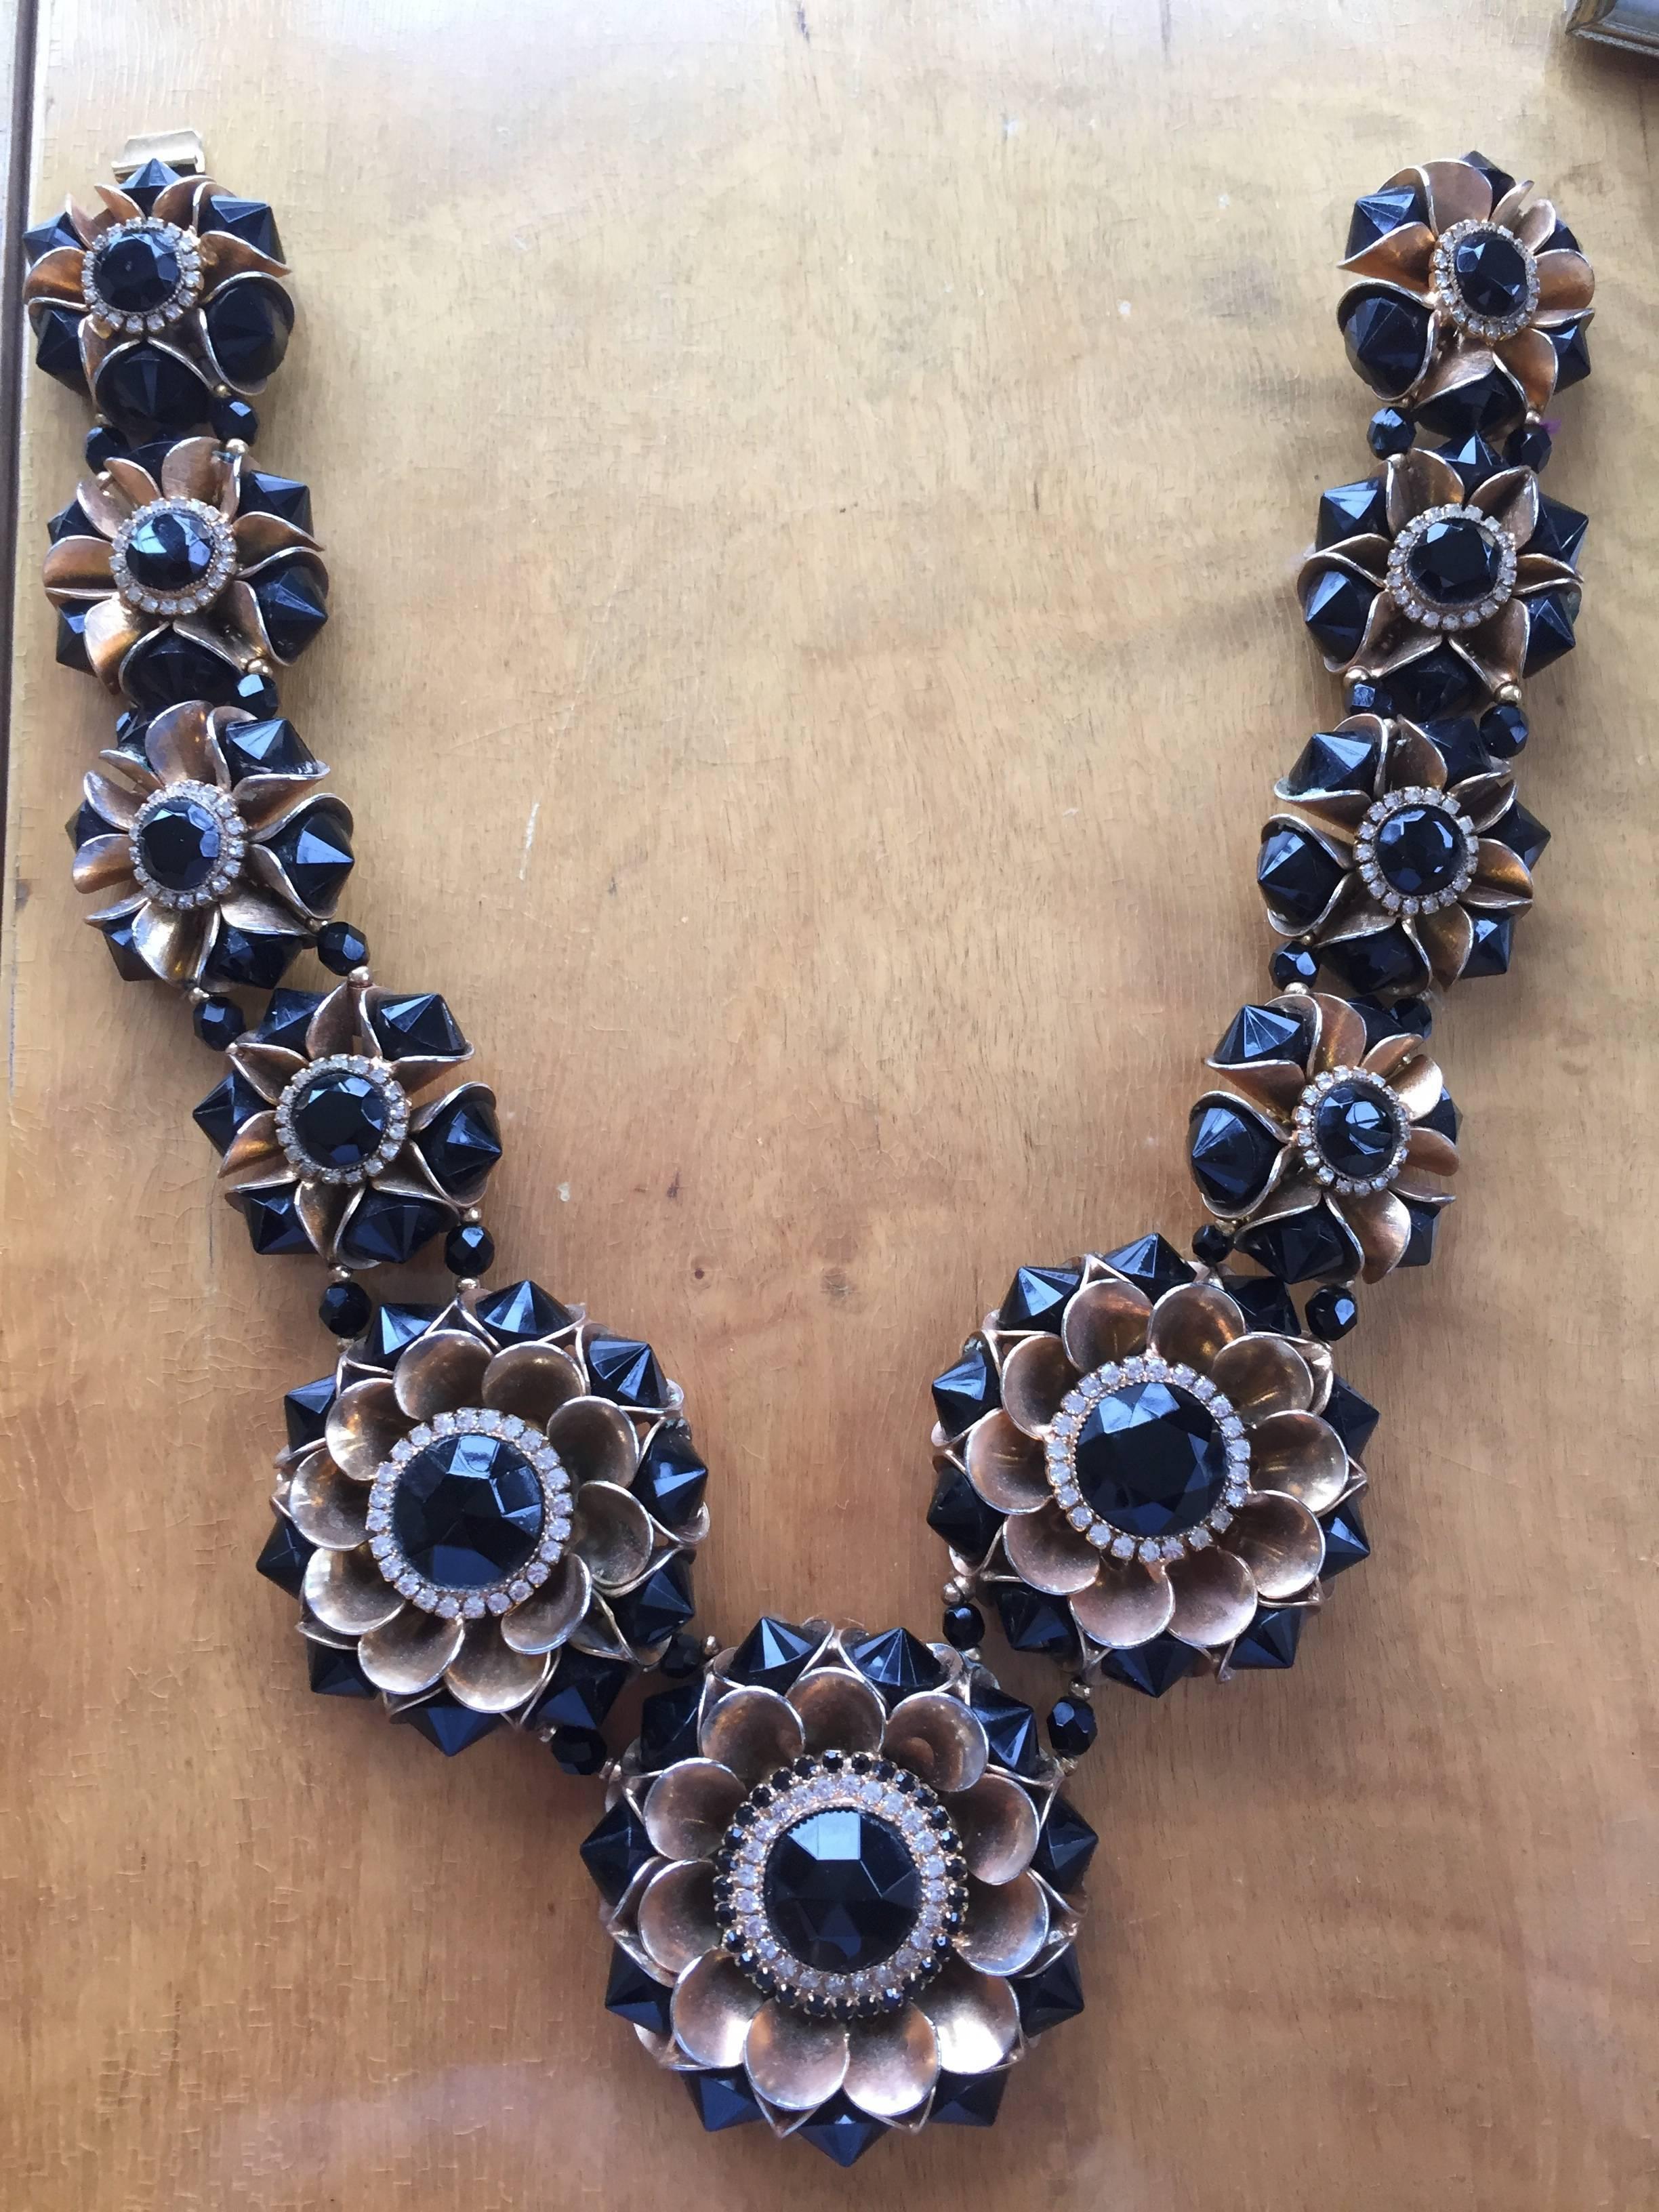 Magnificent floral necklace by William De Lillo in gold tone brass with jet and clear Swarovski crystals.
One off, this is a hand made sample.
William De Lillo was a jeweler with a background in fine jewelry who designed for Miriam Haskell for